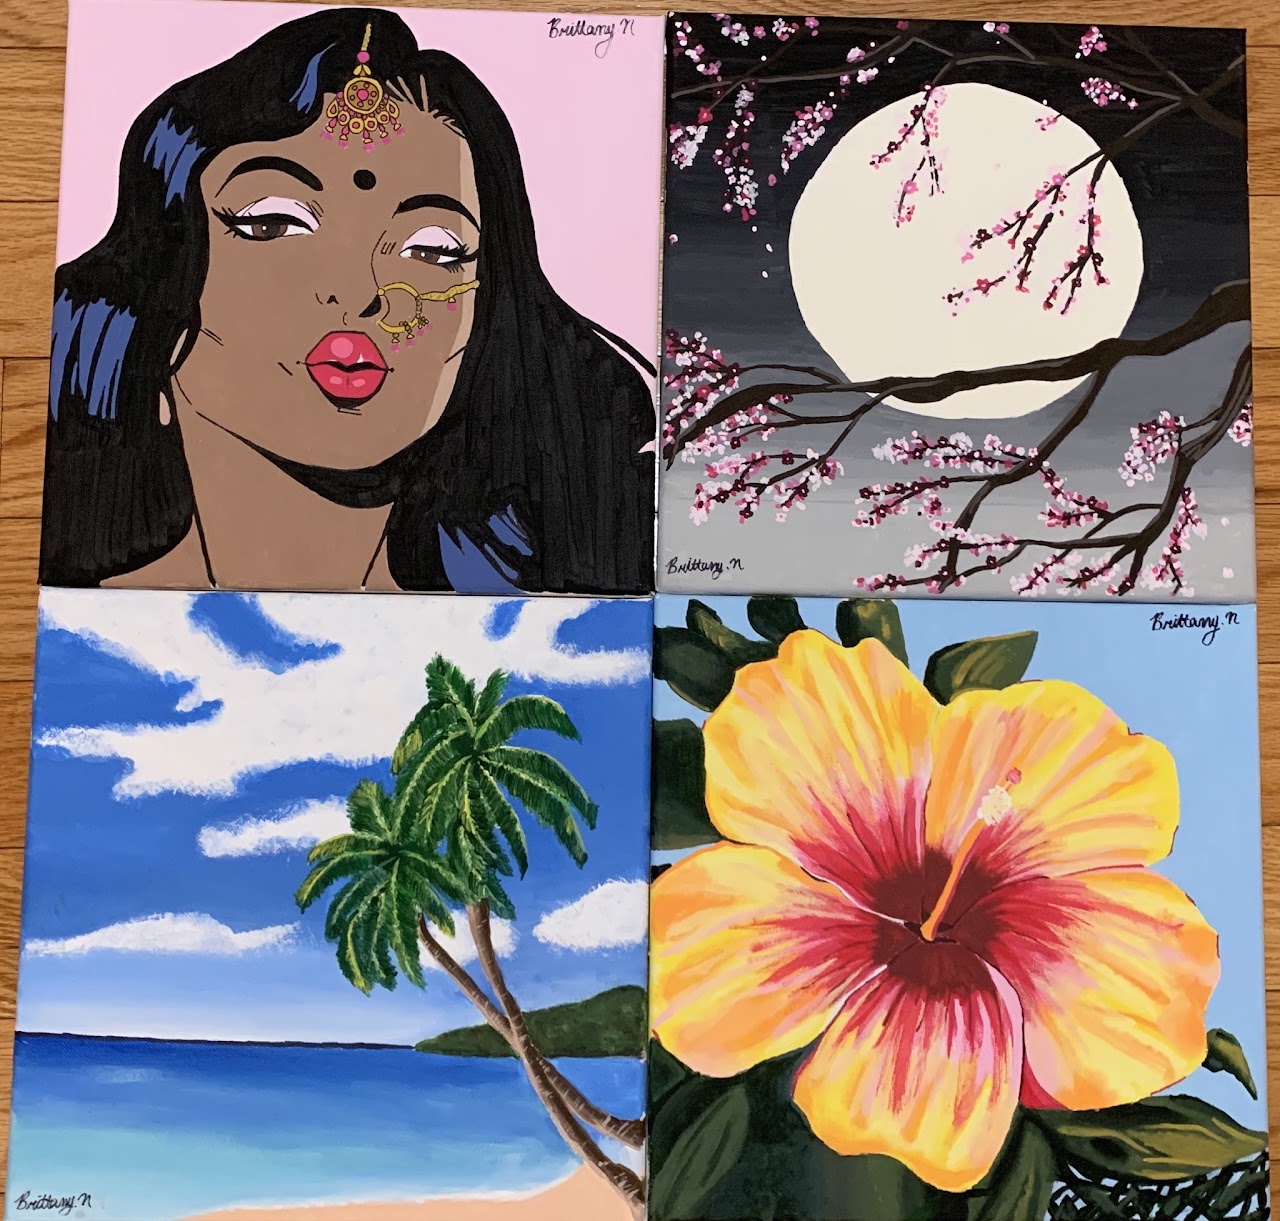 Four featured artworks by Brittany Naraine. From top left to bottom right: A portrait of a person, the moon behind a tree, palm trees at a beach, and a flower.